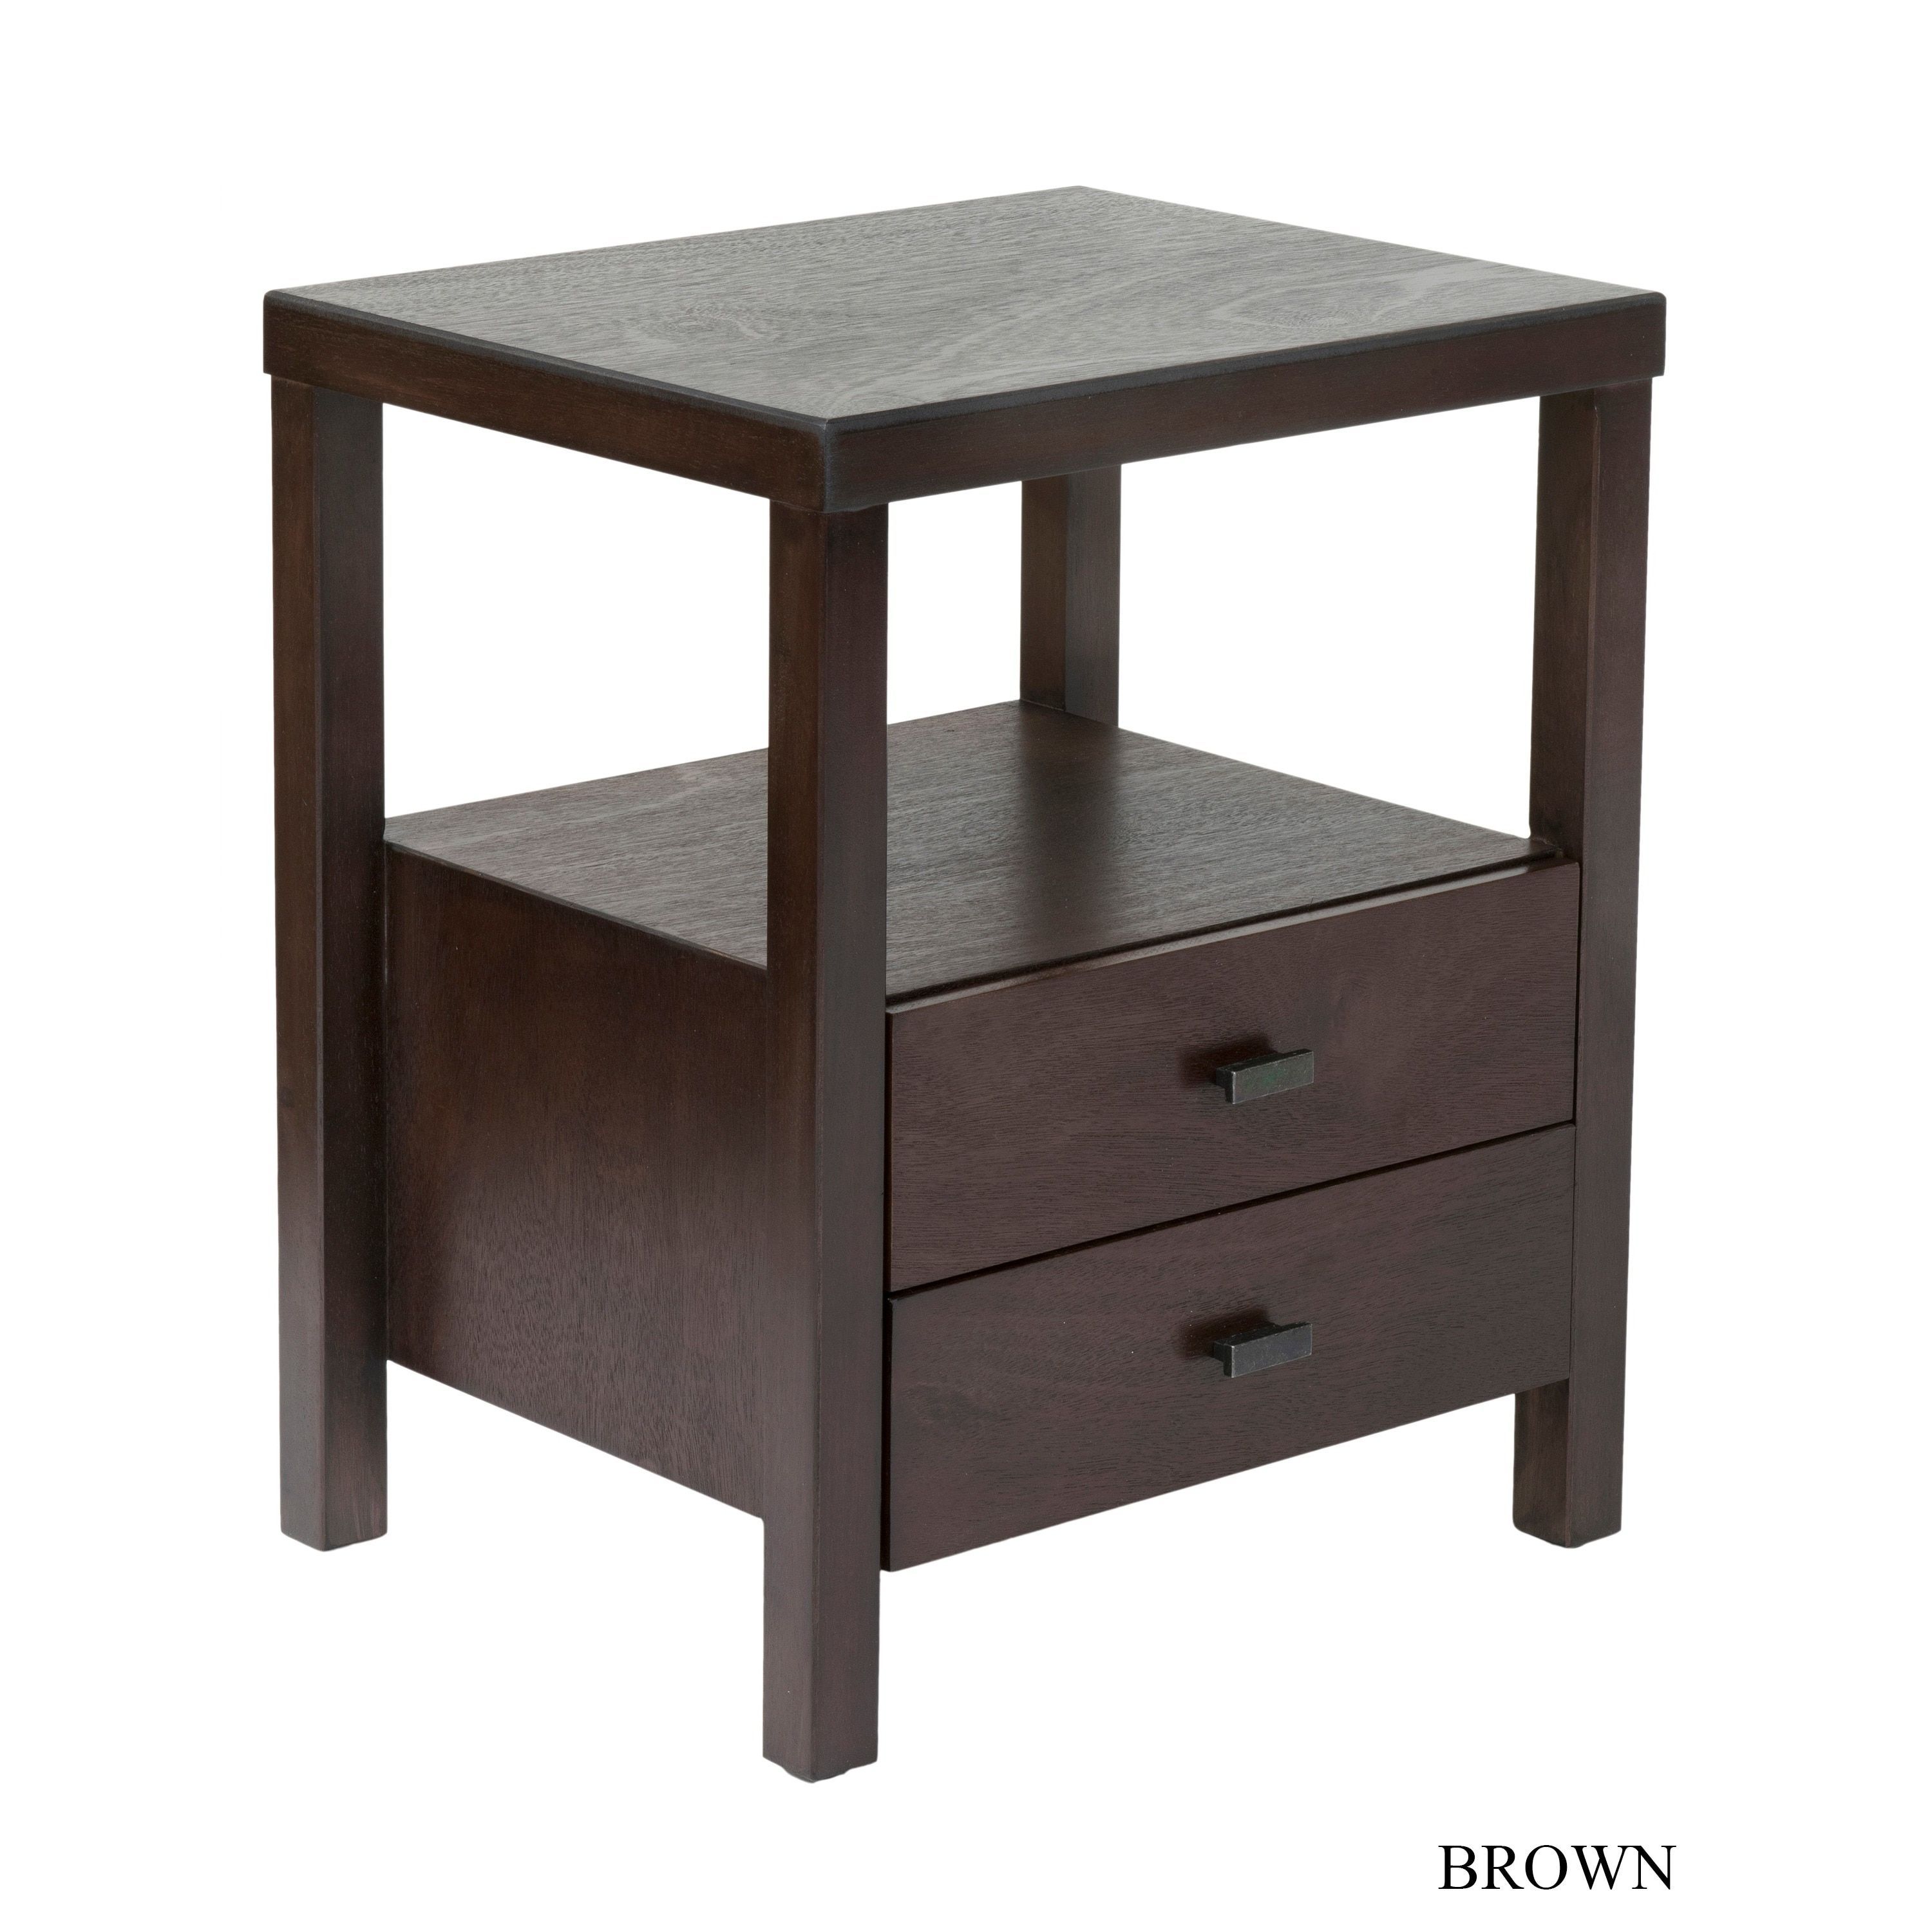 east main westwood acacia wood square accent table coffee console sofa end tables for less transition bars laminate flooring hairpin side ethan allen bar stools clear acrylic